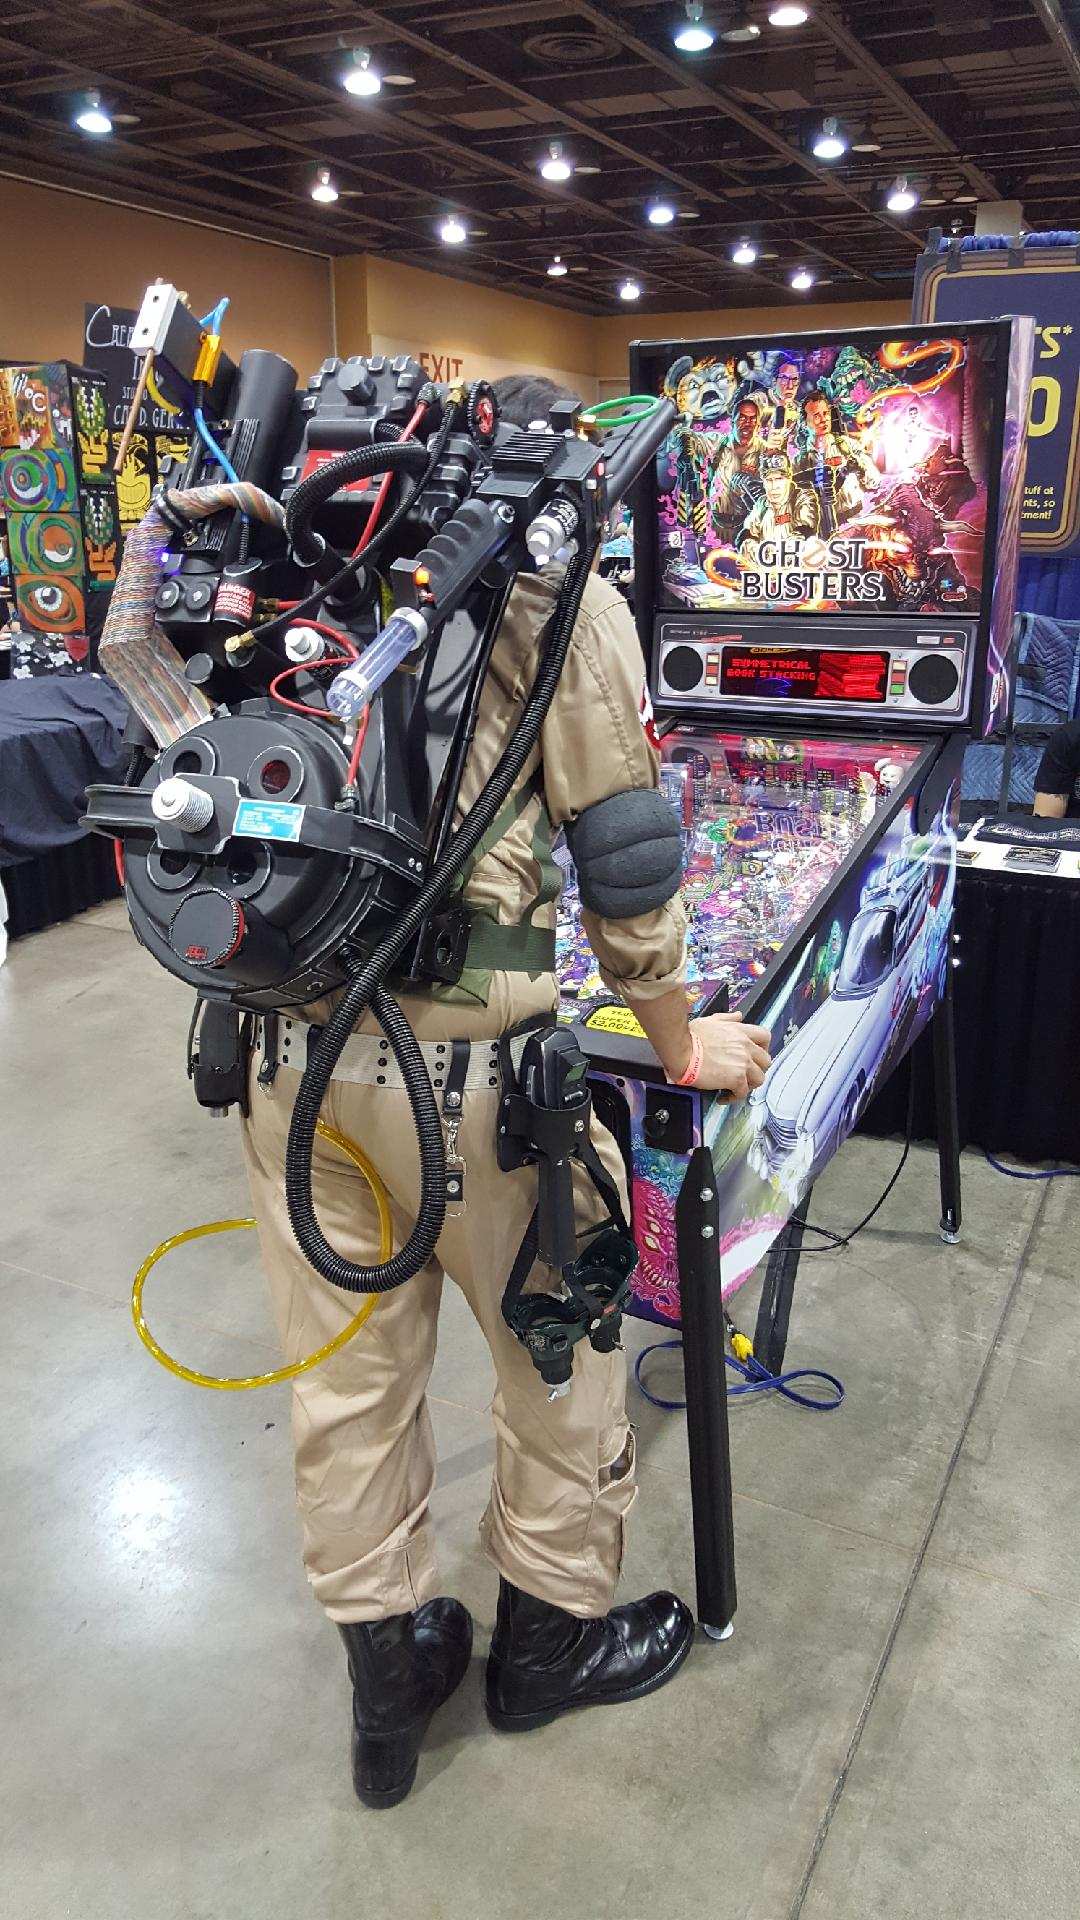 dude dressed up as a ghostbuster and at an arcade playing the ghostbusters pinball machine